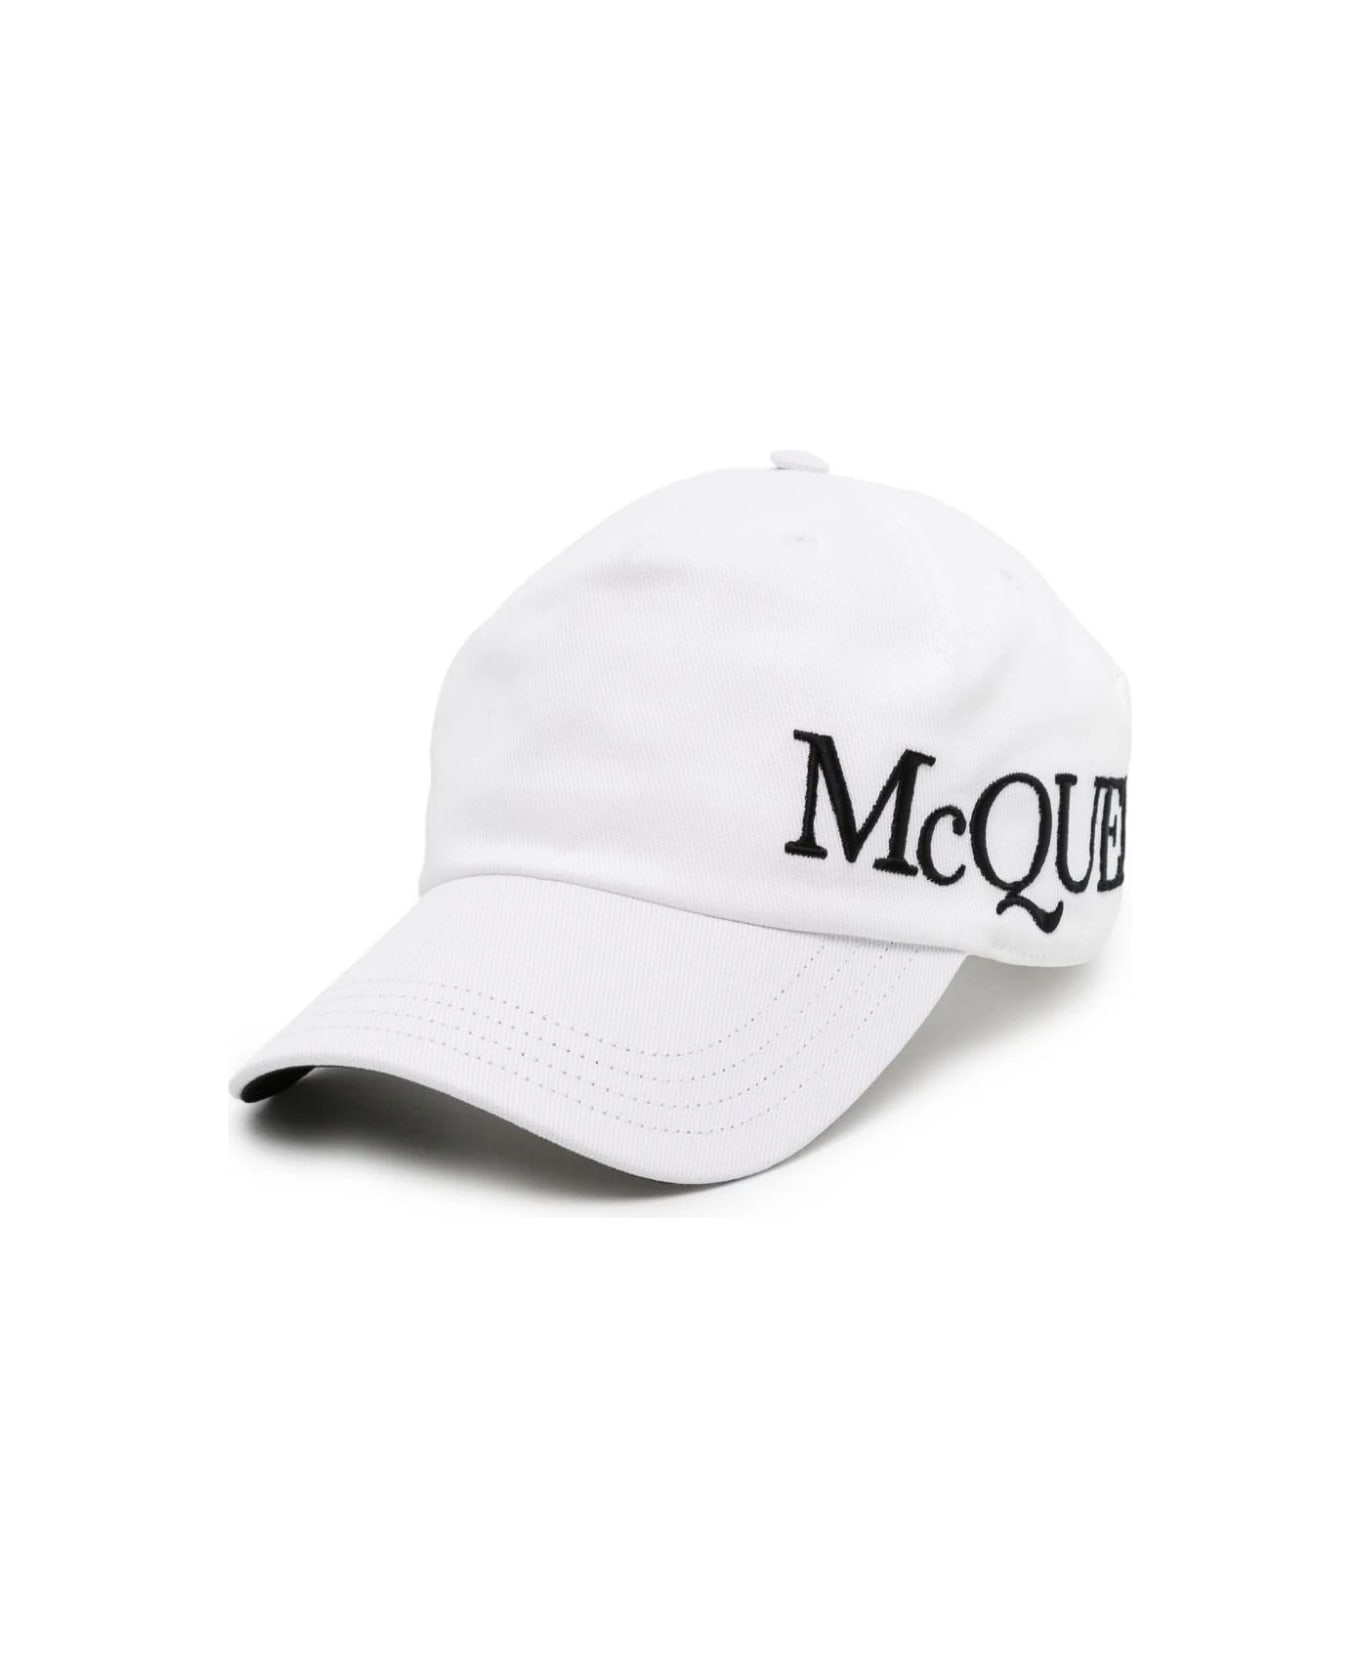 Alexander McQueen White Baseball Hat With Mcqueen Embroidery - White 帽子